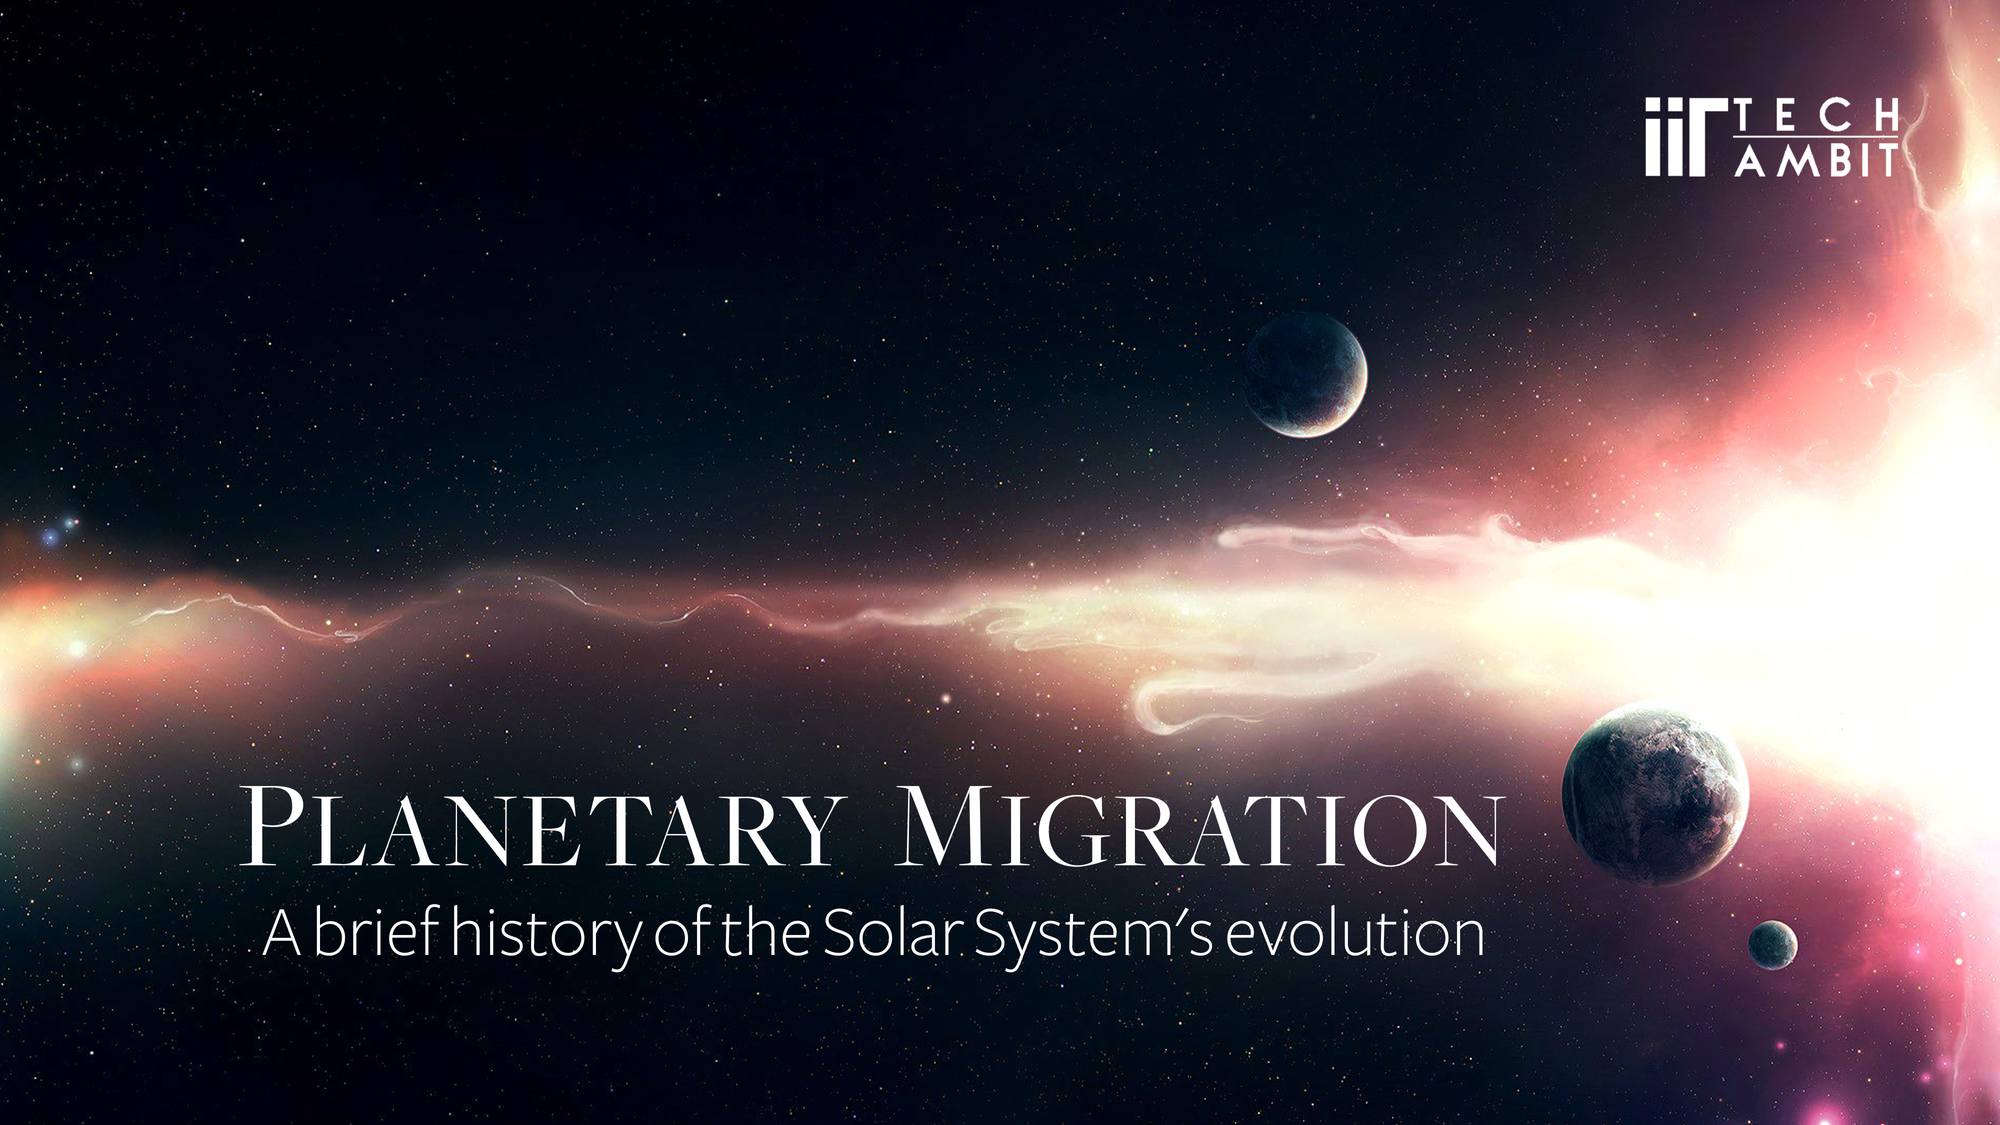 Planetary Migration: A brief history of the Solar System's evolution